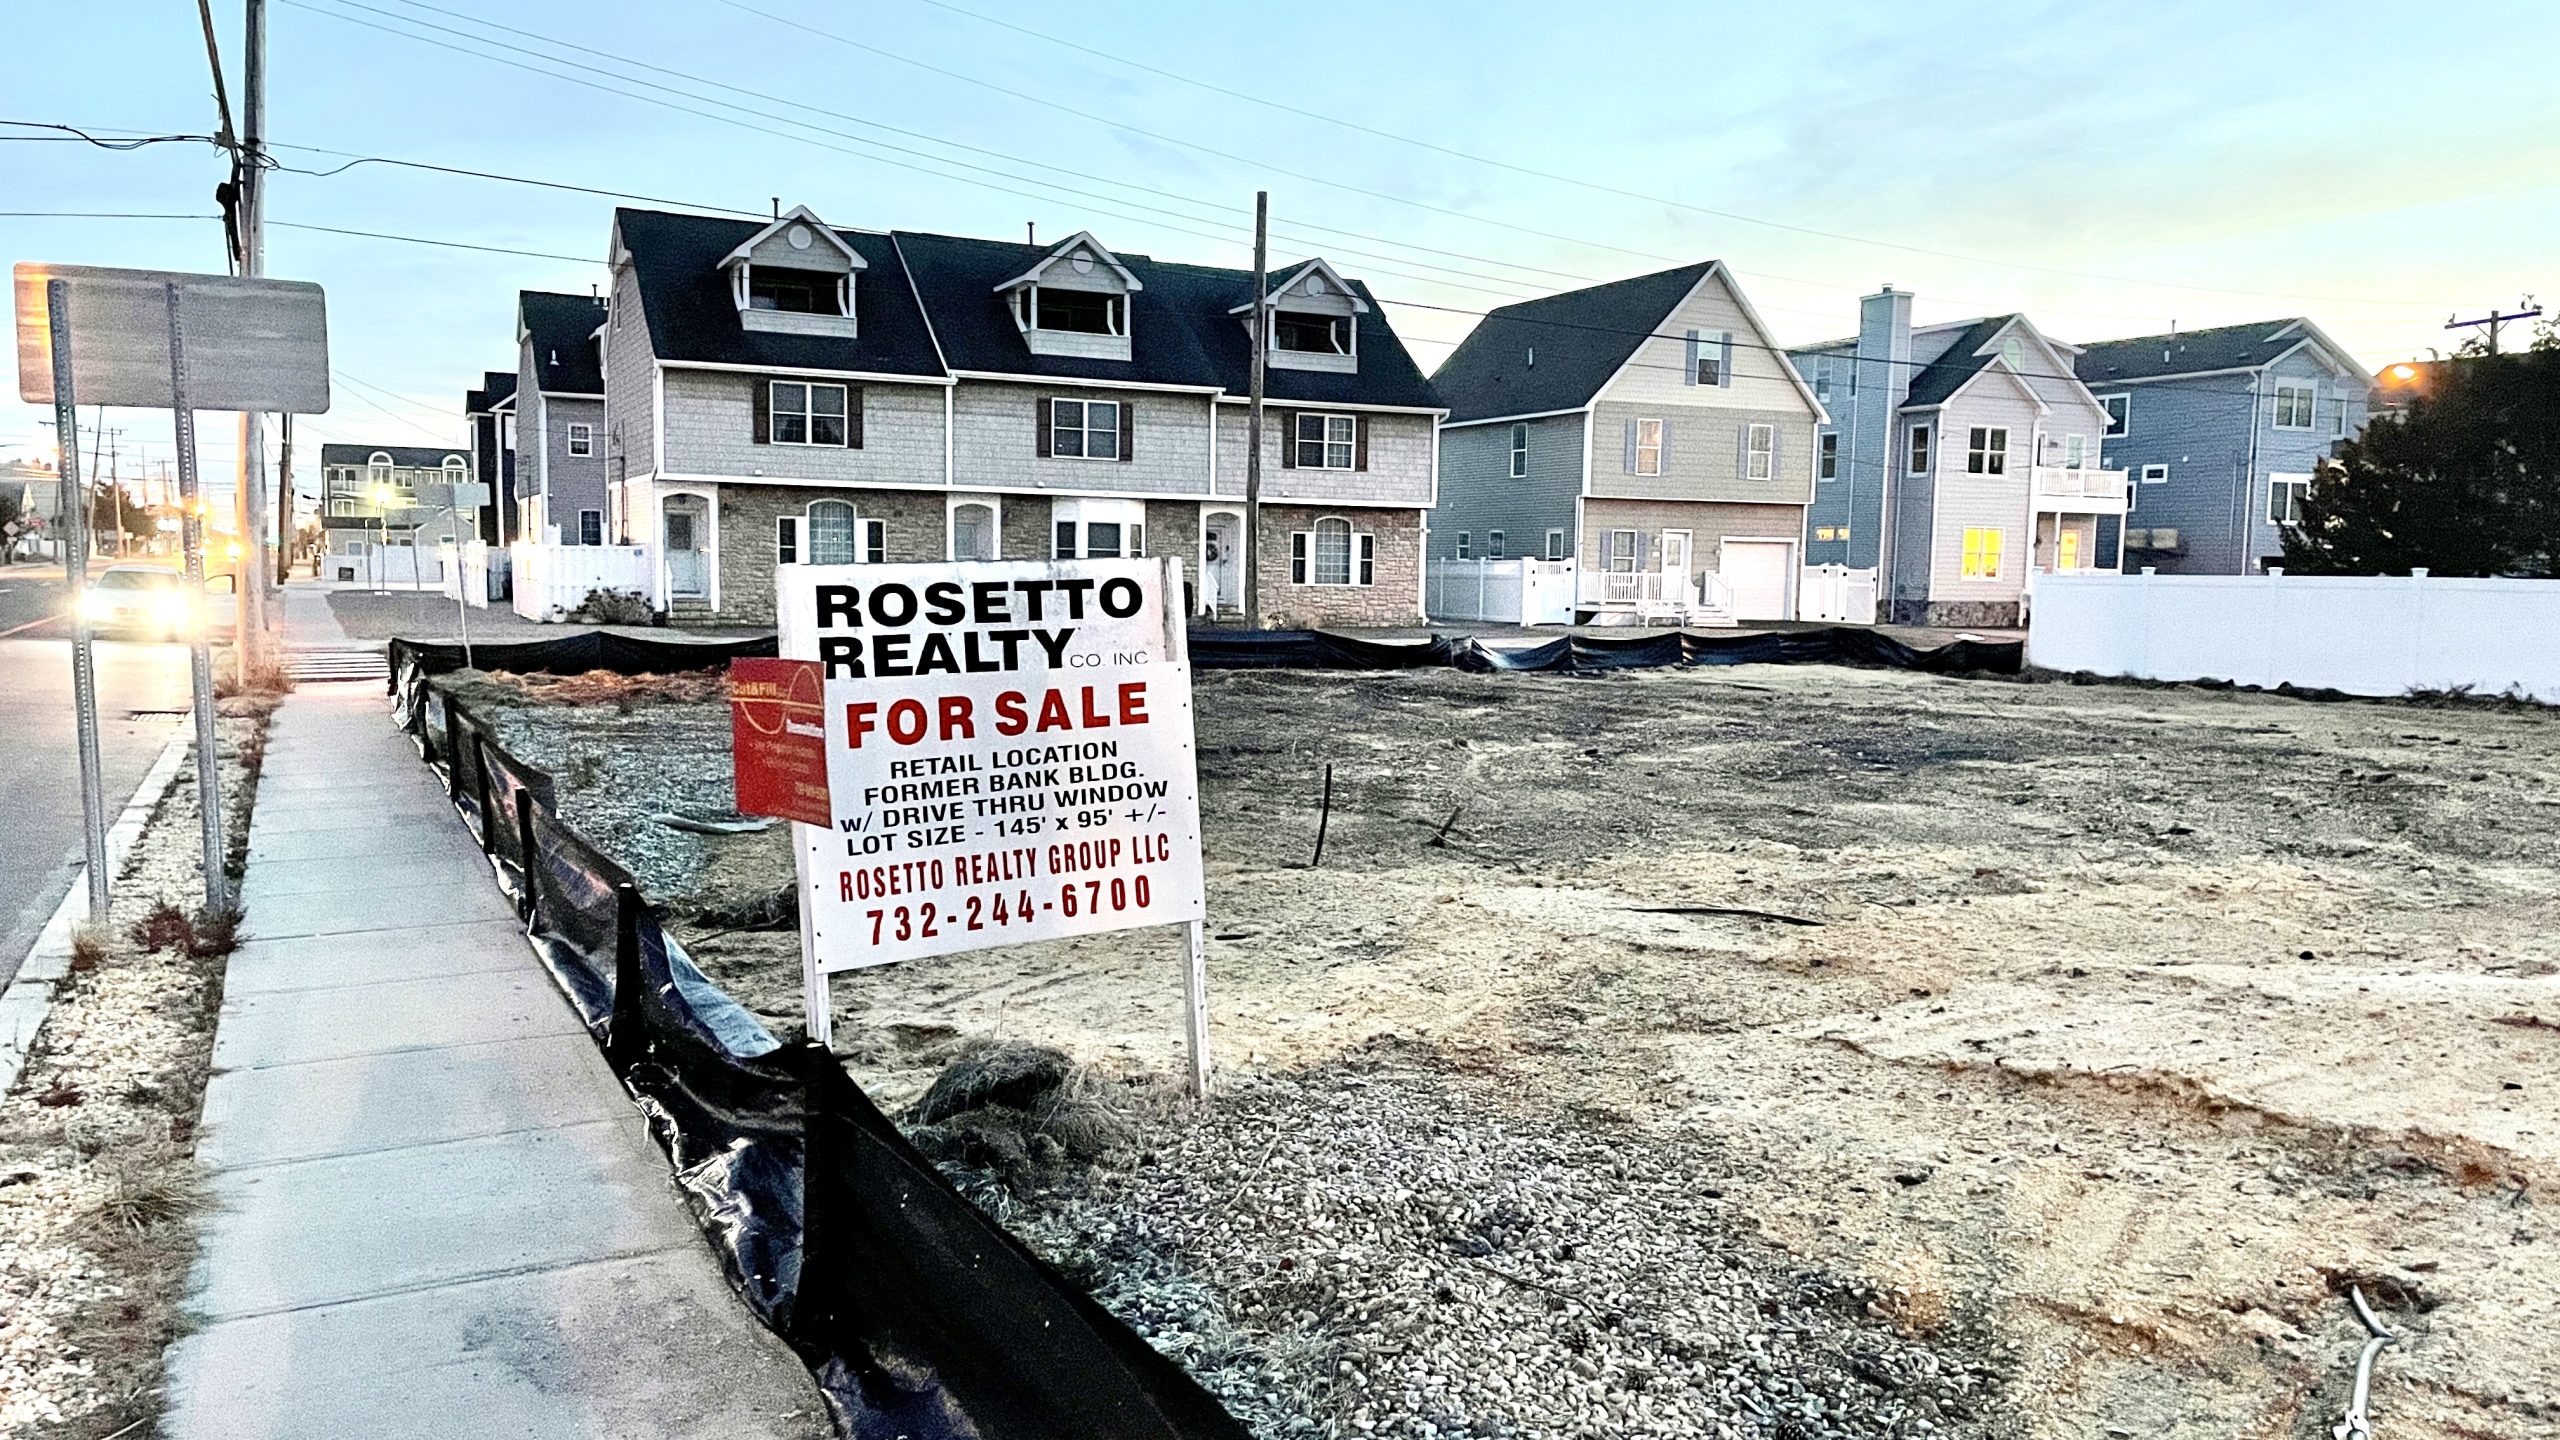 The property at 1801 Route 35 North, Ortley Beach. (Photo: Daniel Nee)